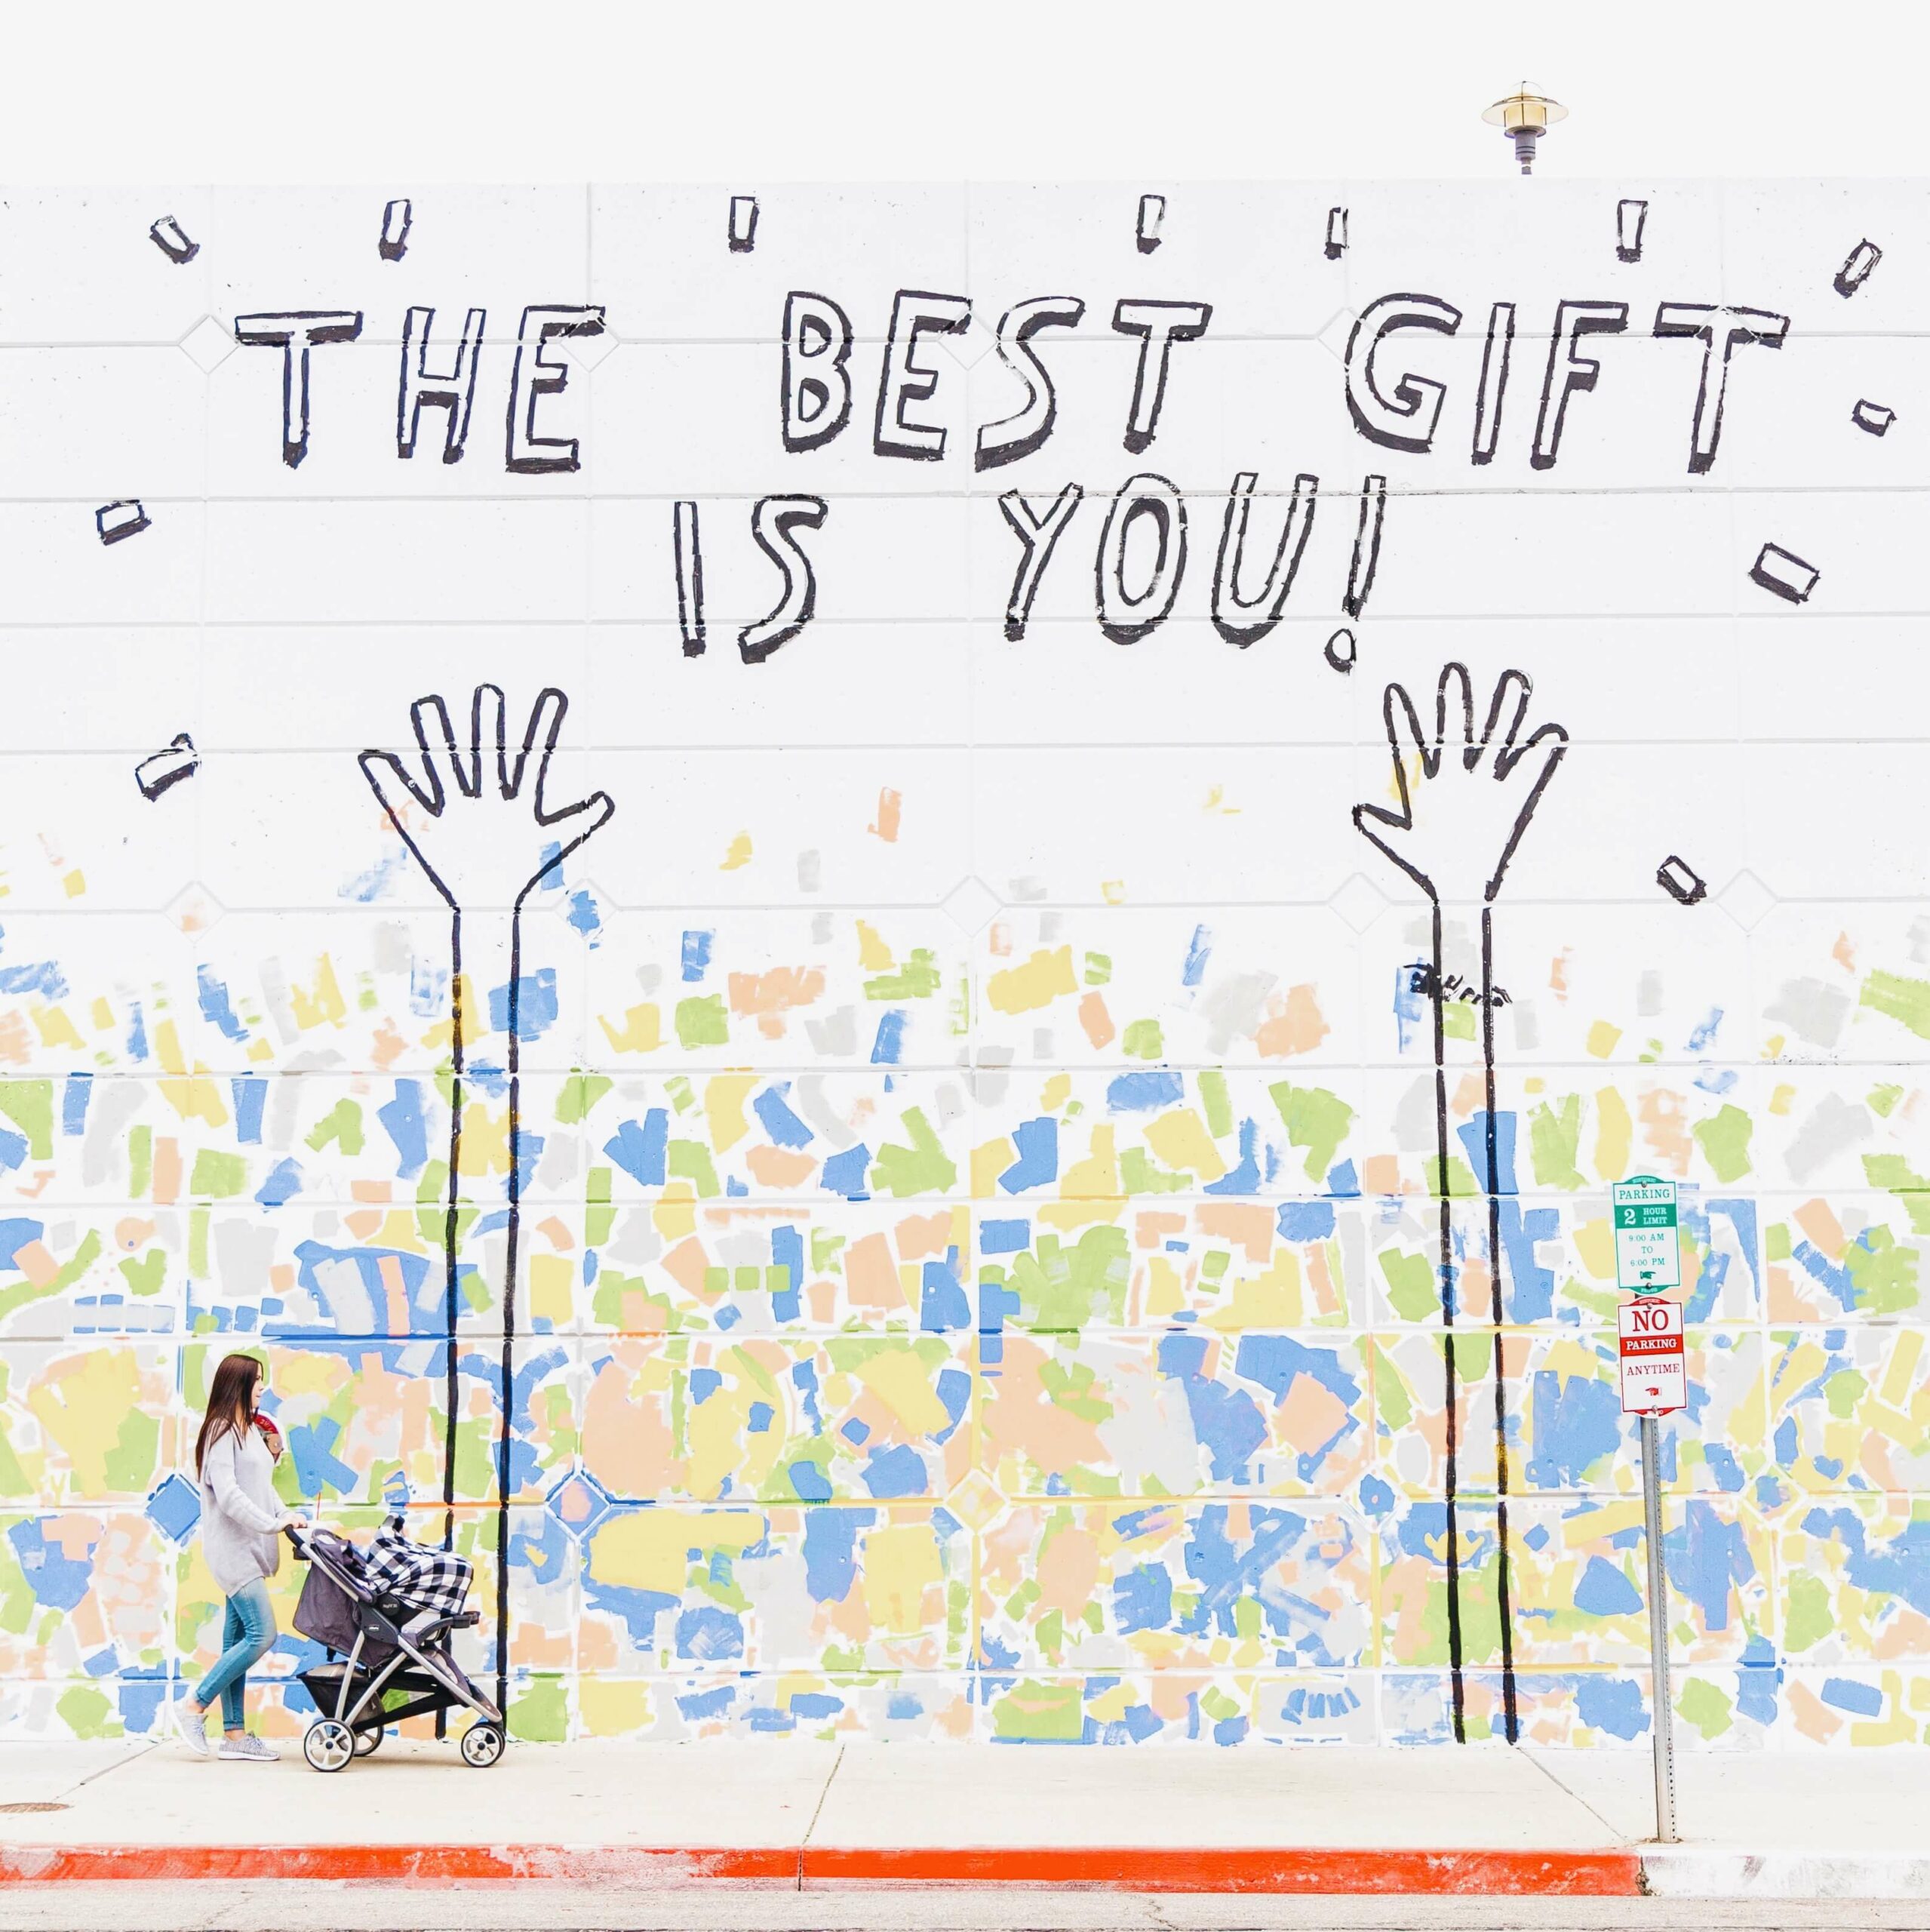 Woman with stroller walking past wall with the text "The Best Gift is You" with hands and multi-colored confetti